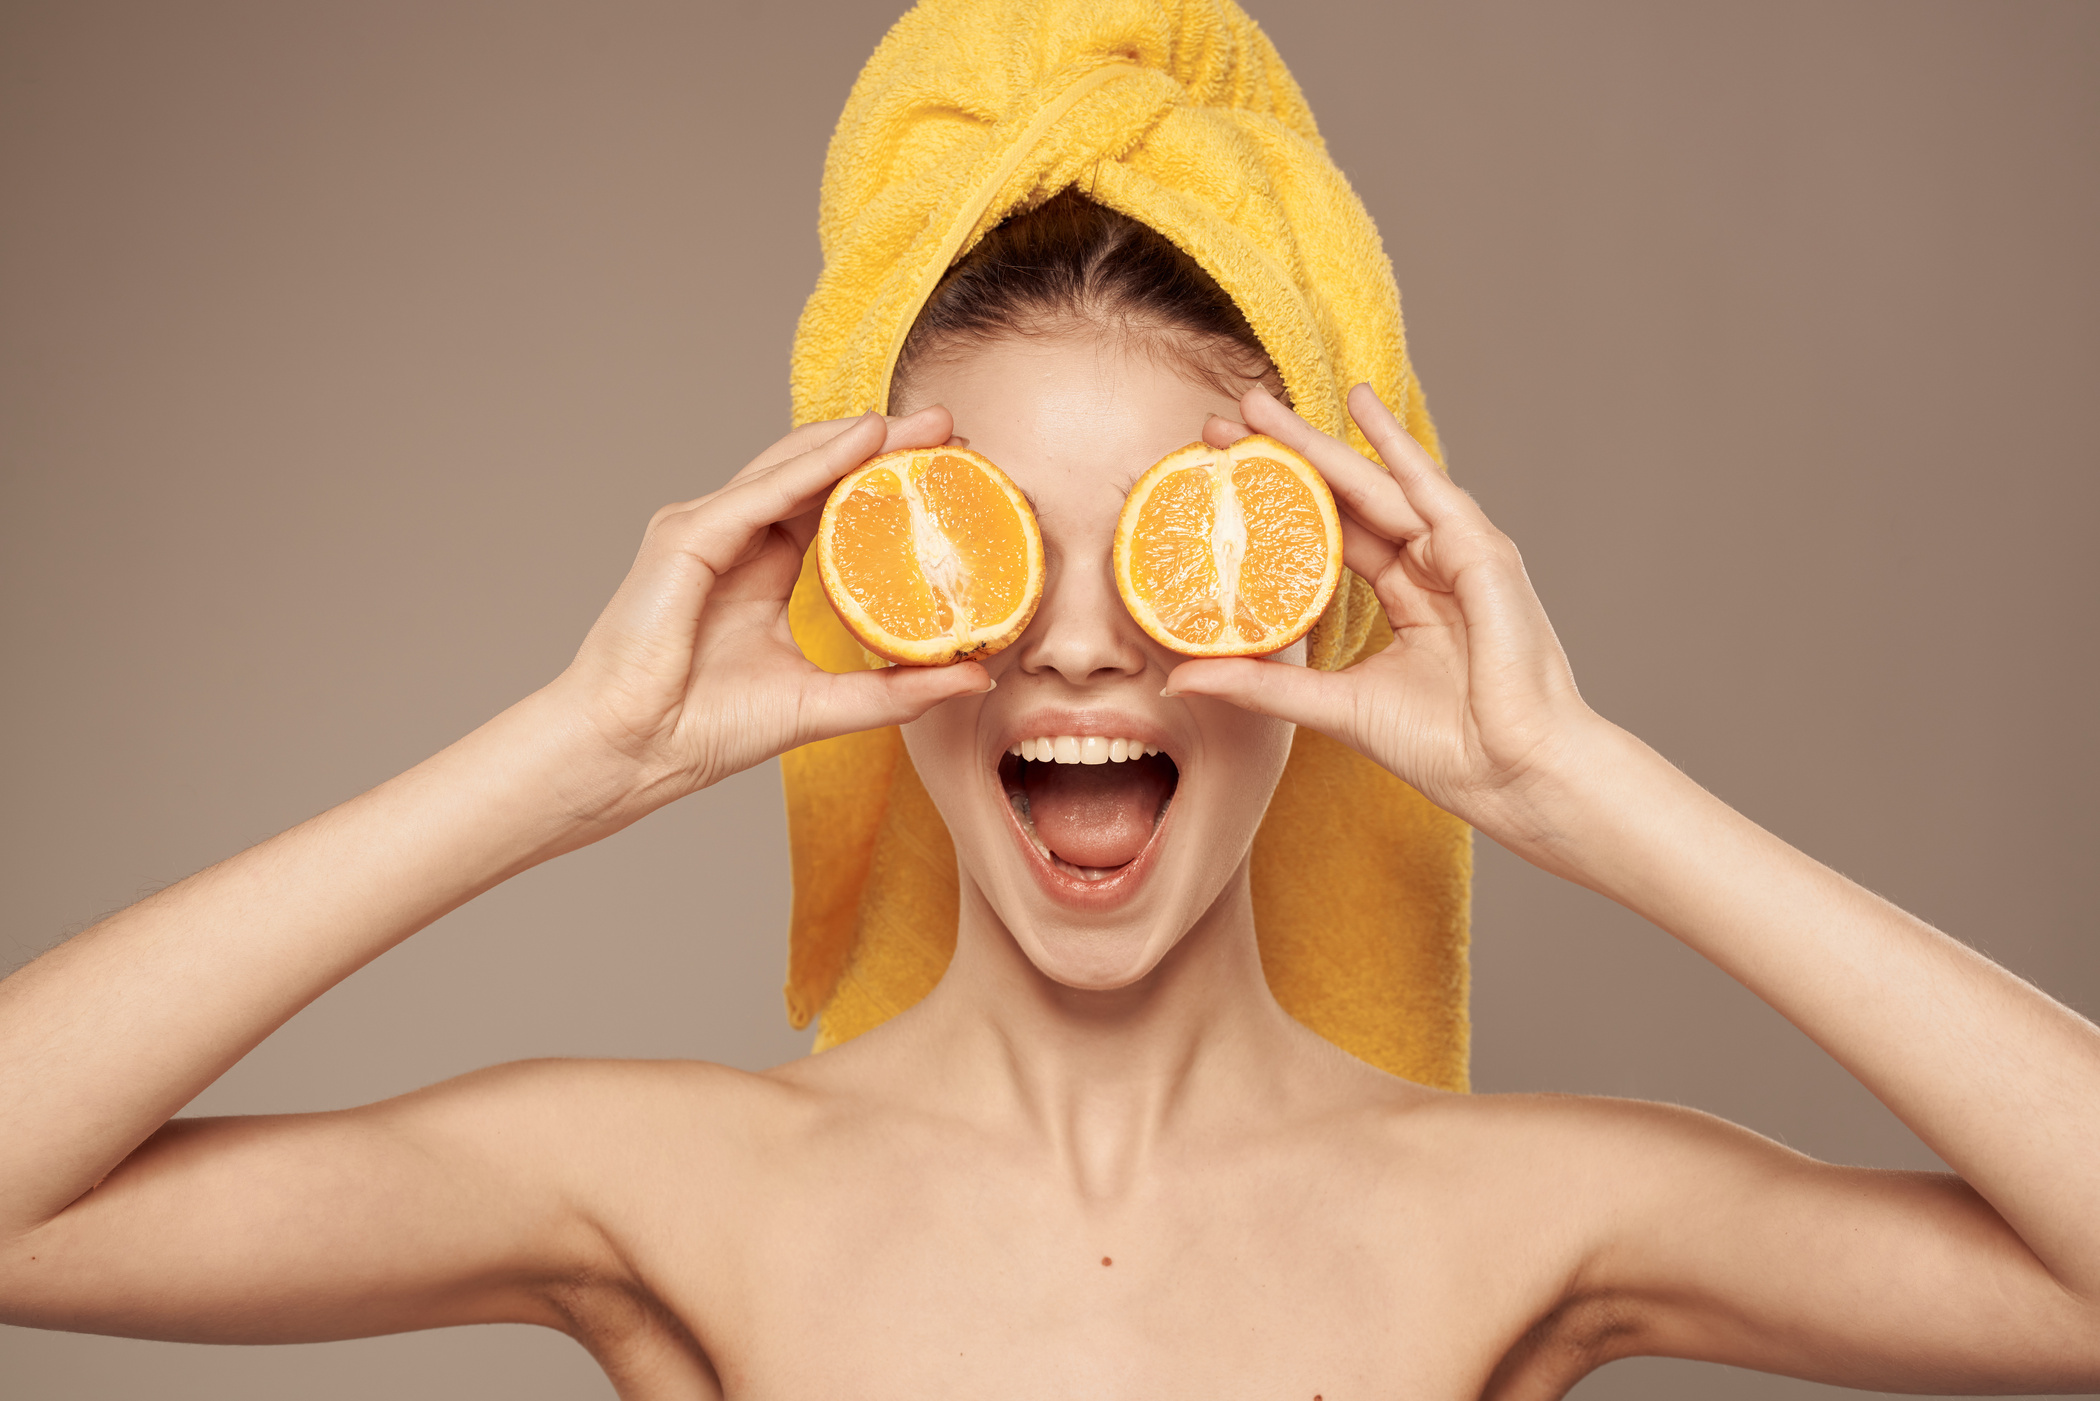 Cheerful Woman Holding Oranges near Her Eyes Skin Care